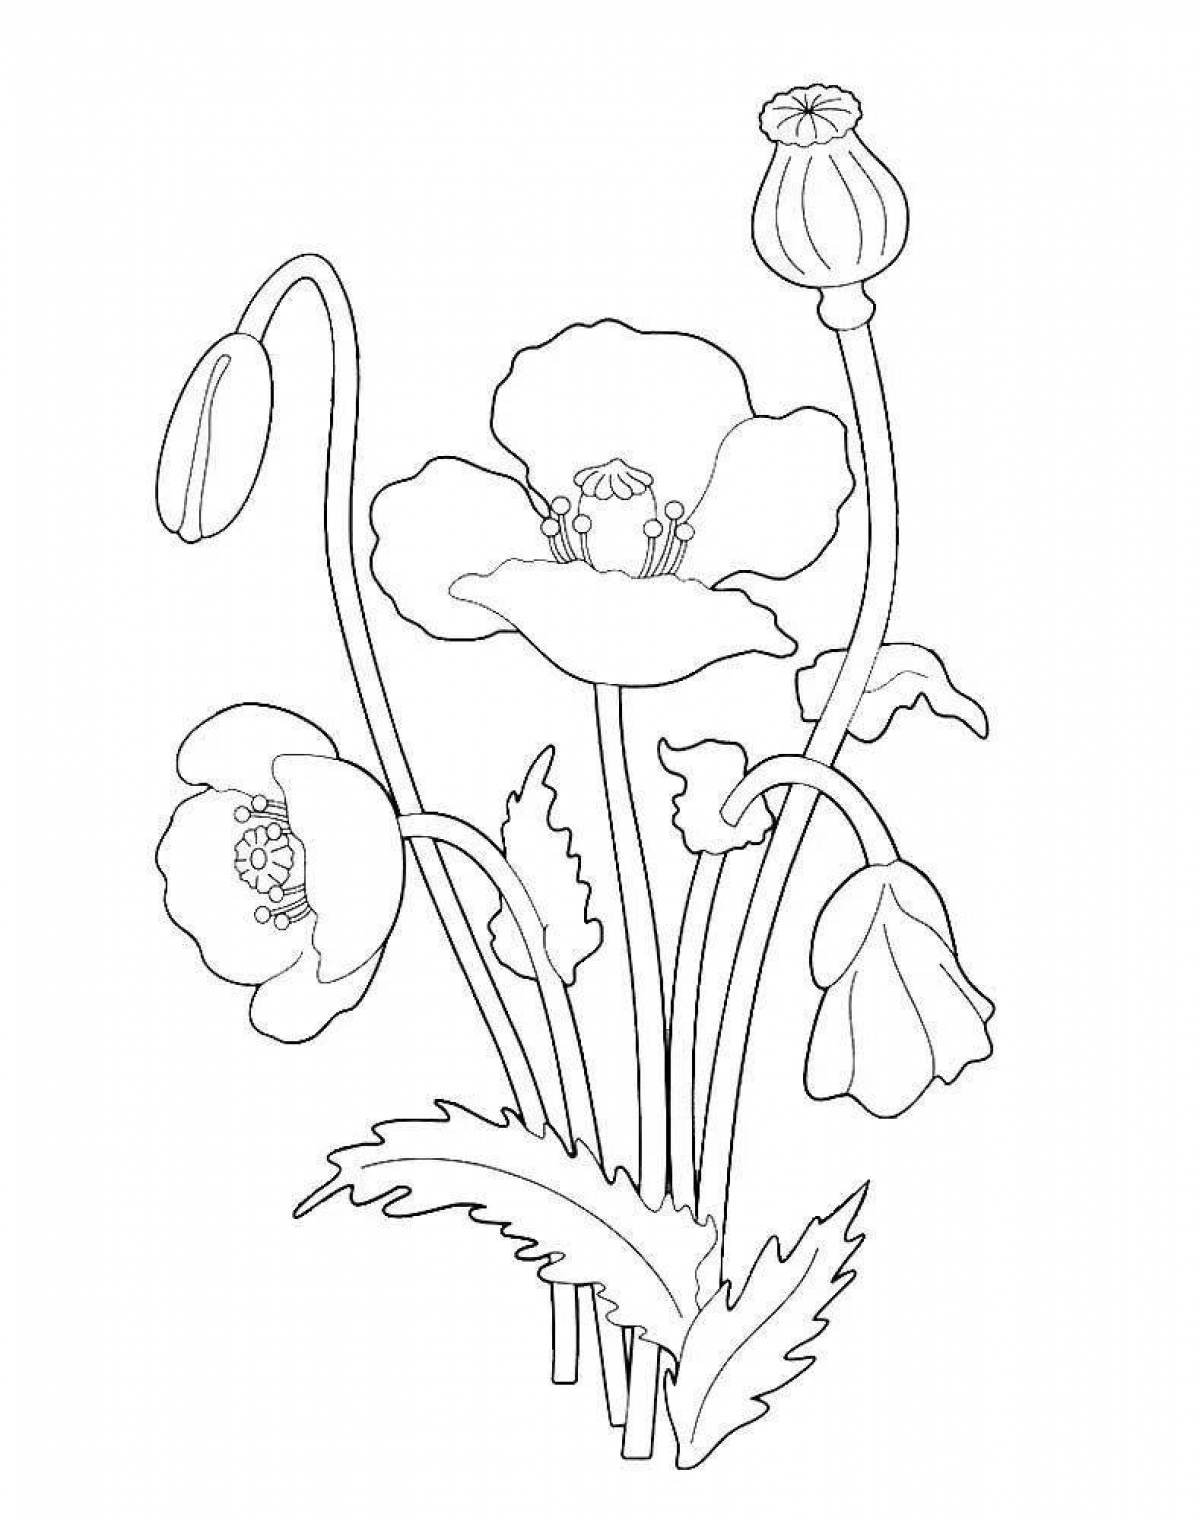 Exquisite poppy flower coloring book